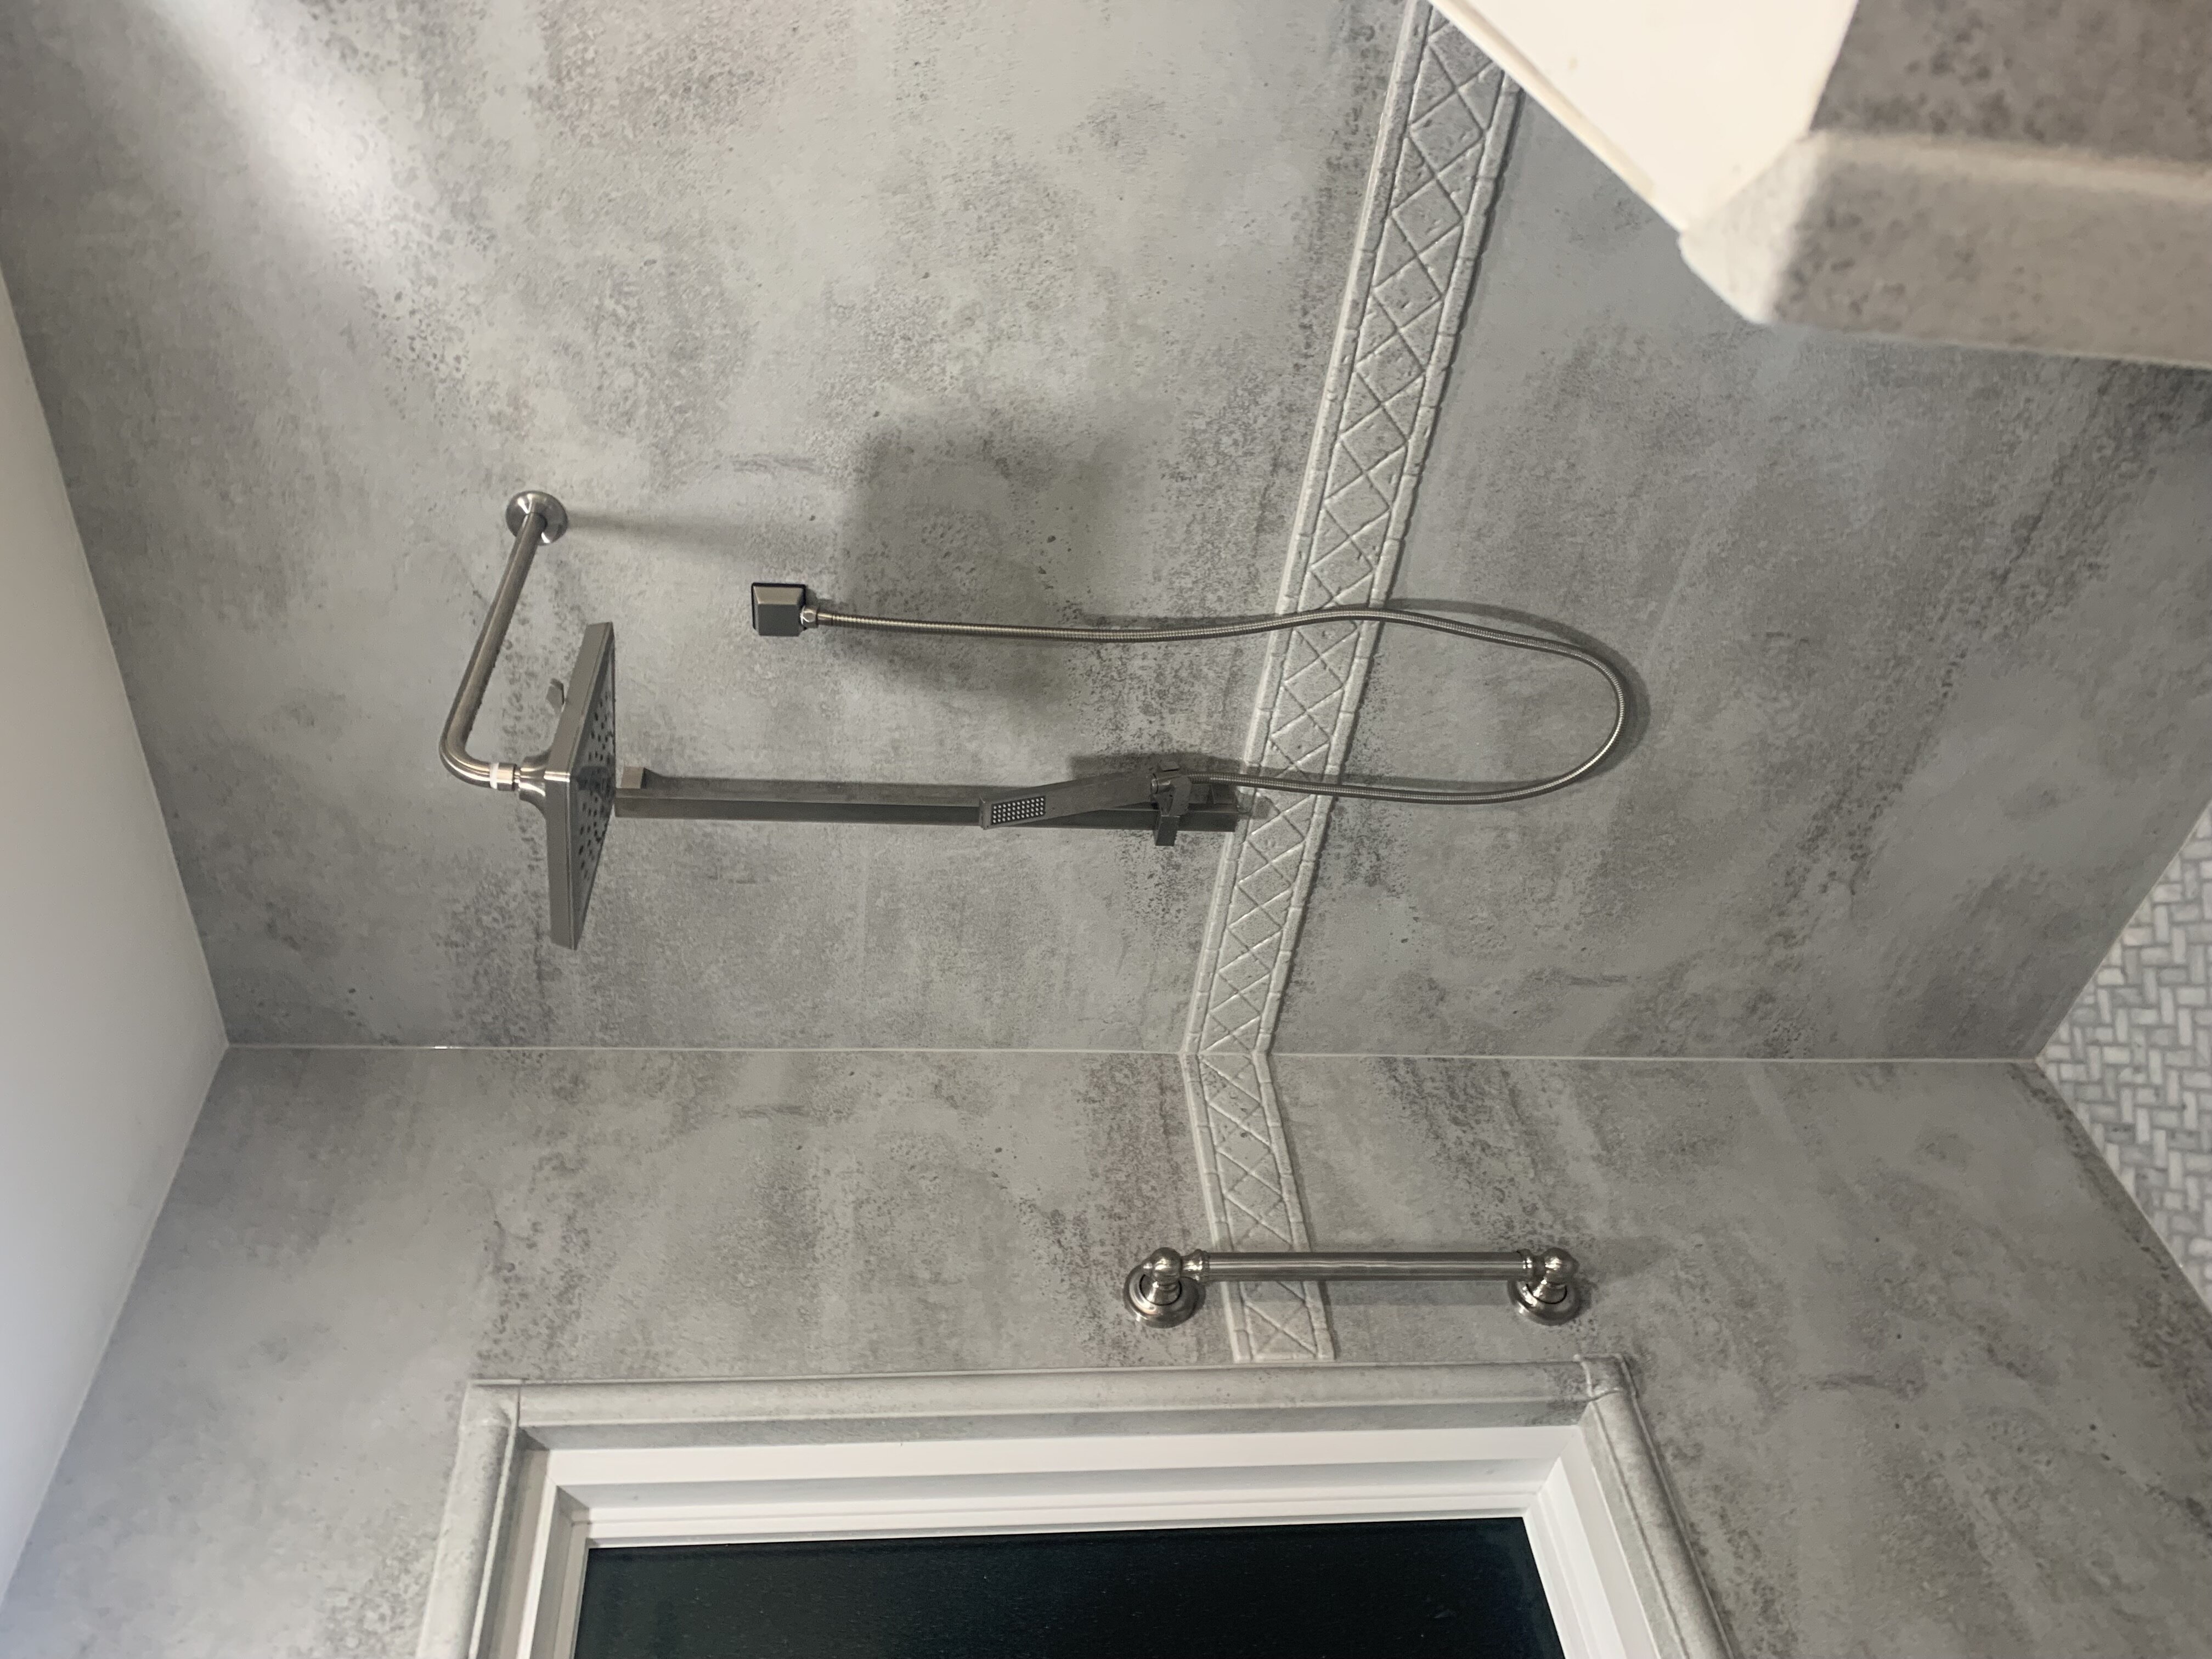 New shower head and grab bar